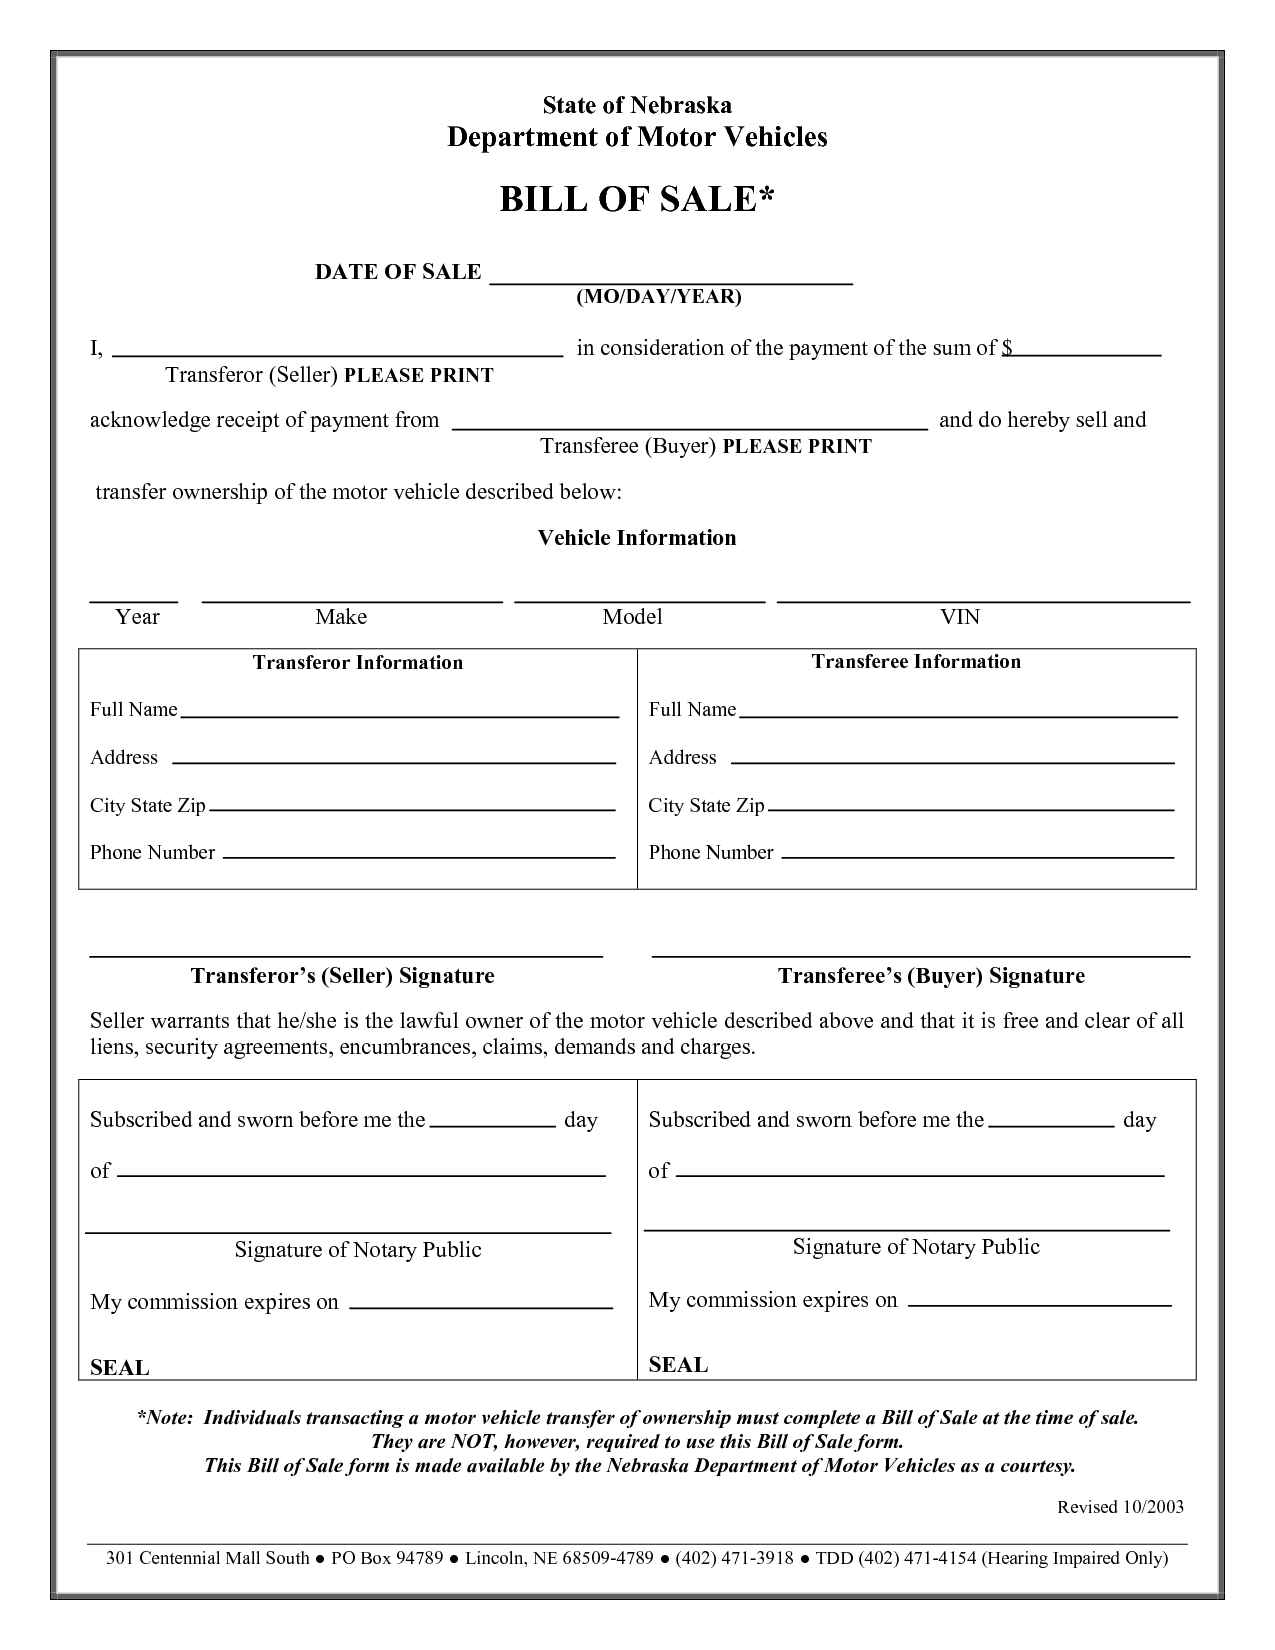 Free Printable Auto Bill Of Sale Form (Generic) - Free Legal Forms Online Printable